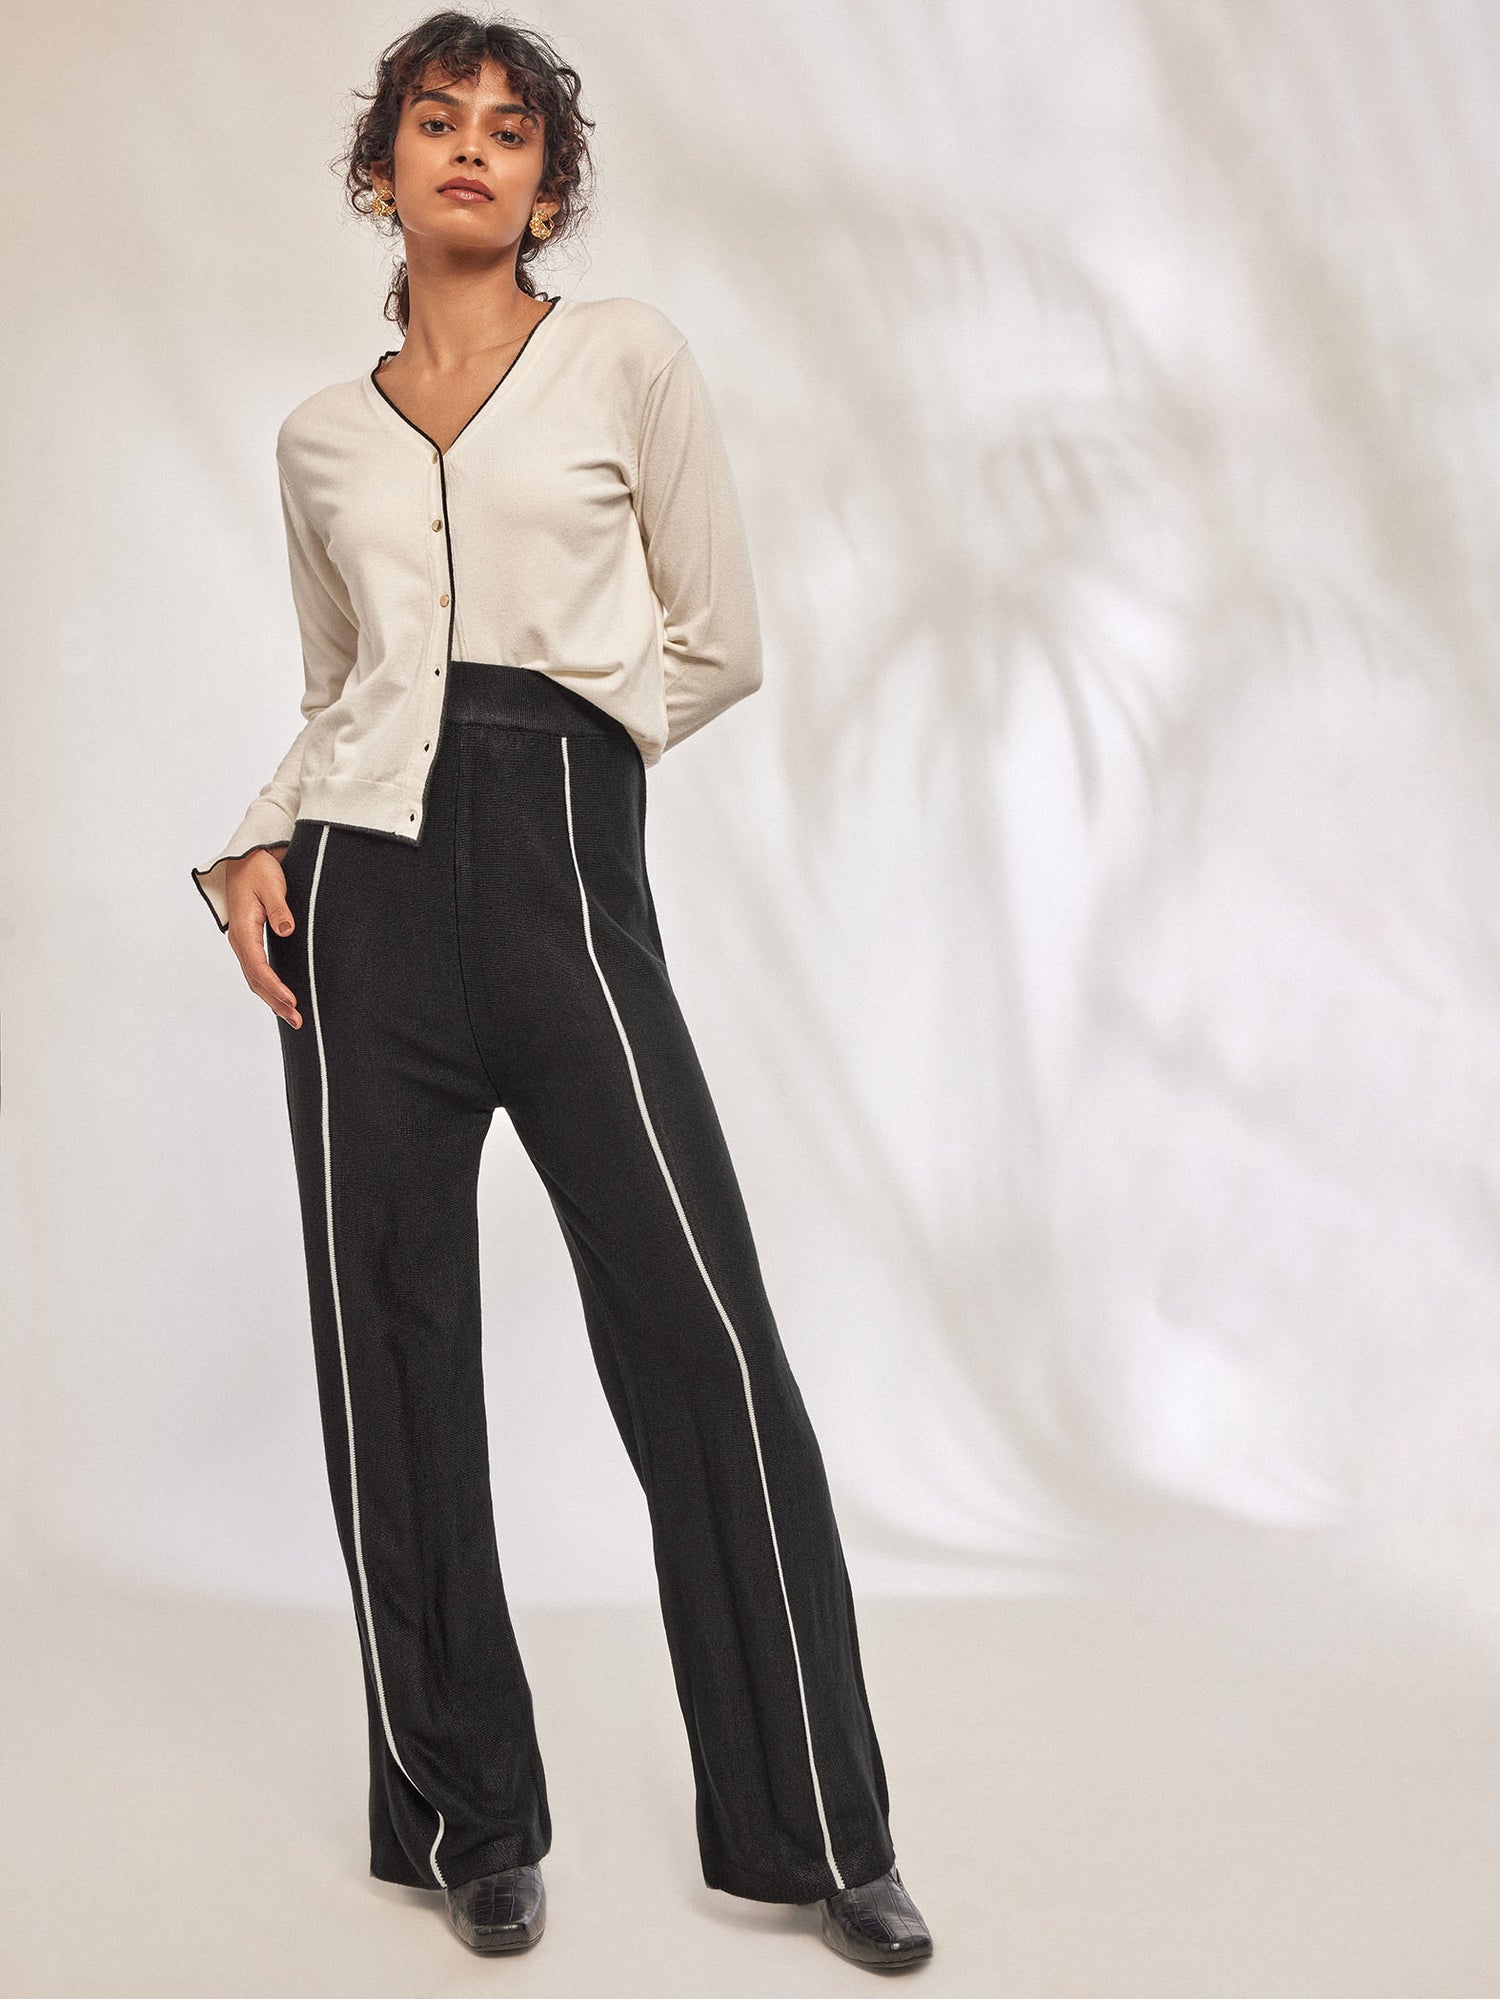 Black Knit Piping Detail Trousers